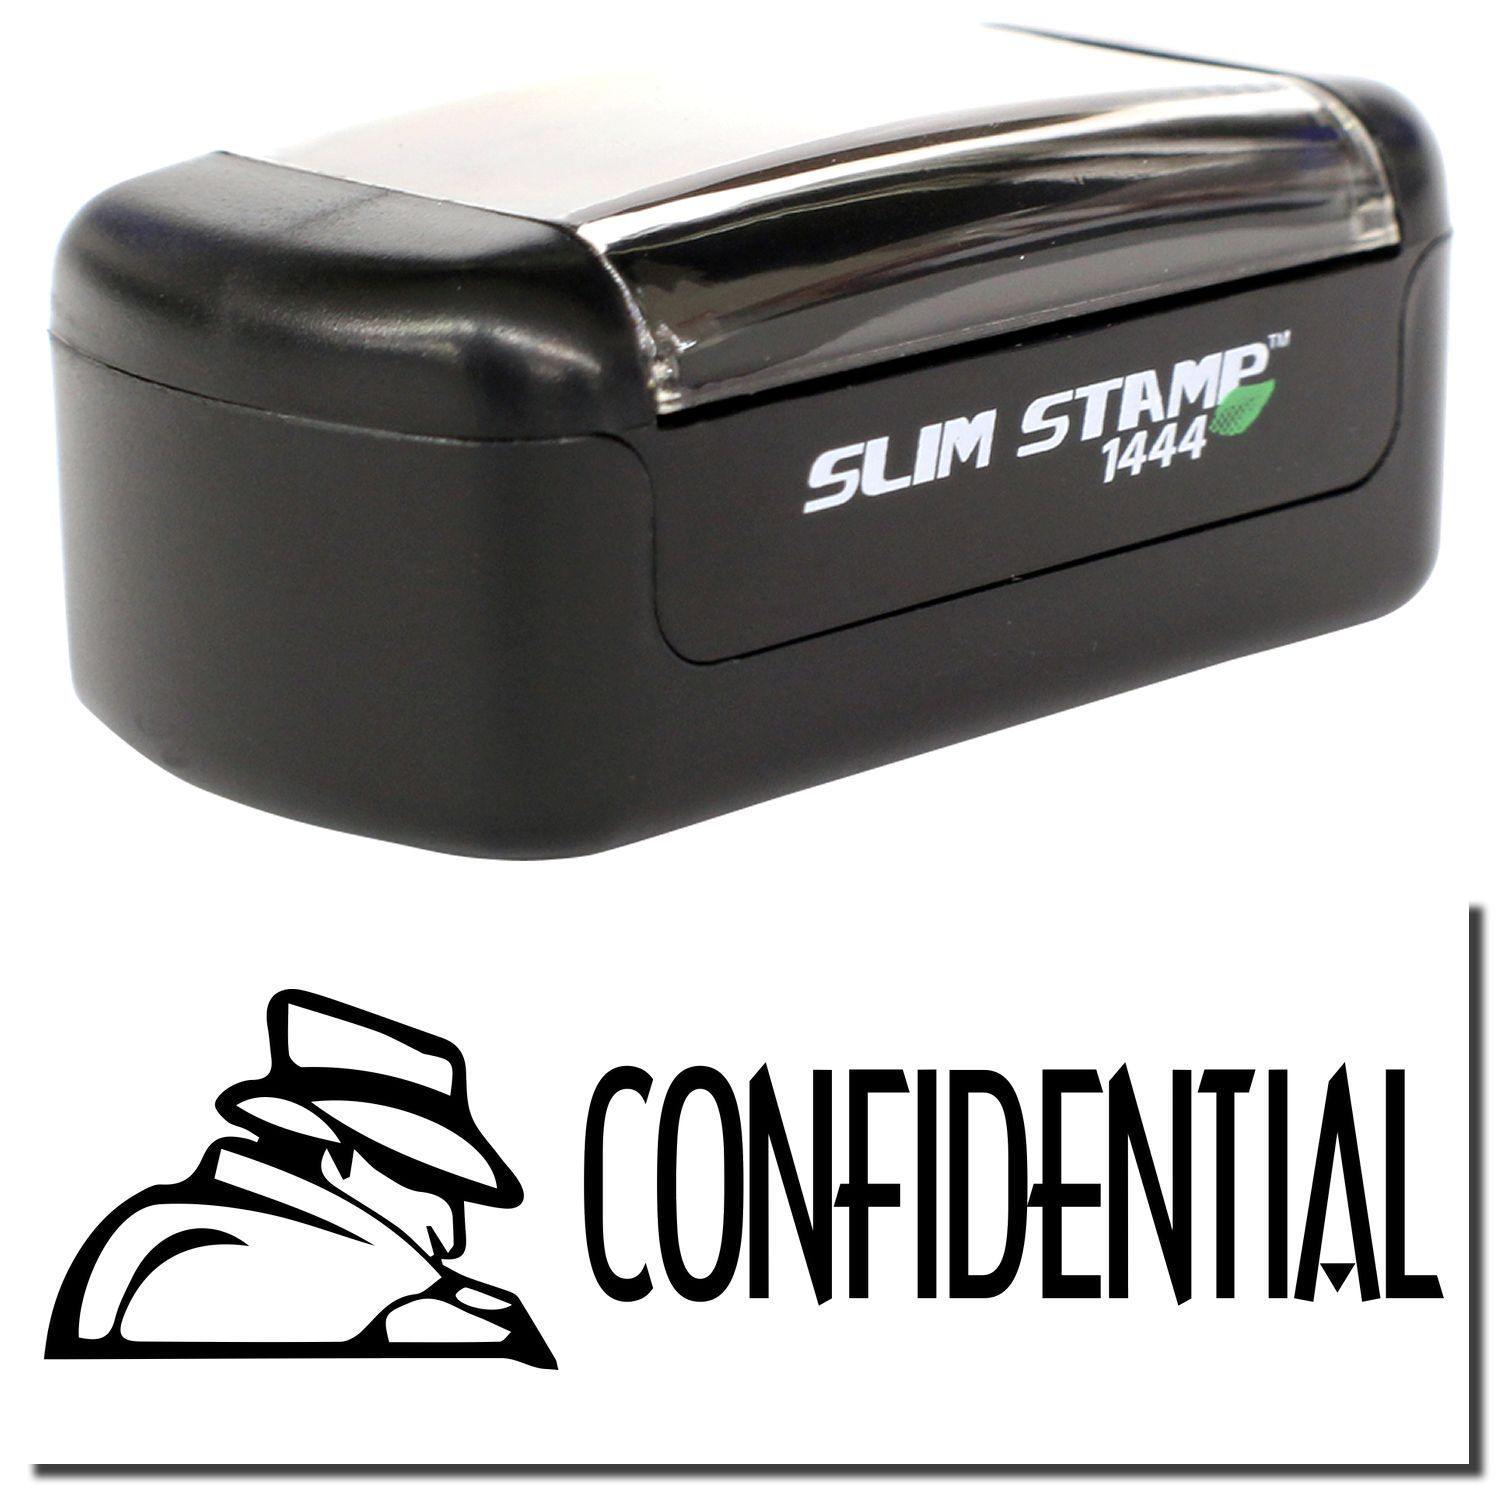 A stock office pre-inked stamp with a stamped image showing how the text "CONFIDENTIAL" with an eye-catching logo on the left side is displayed after stamping.